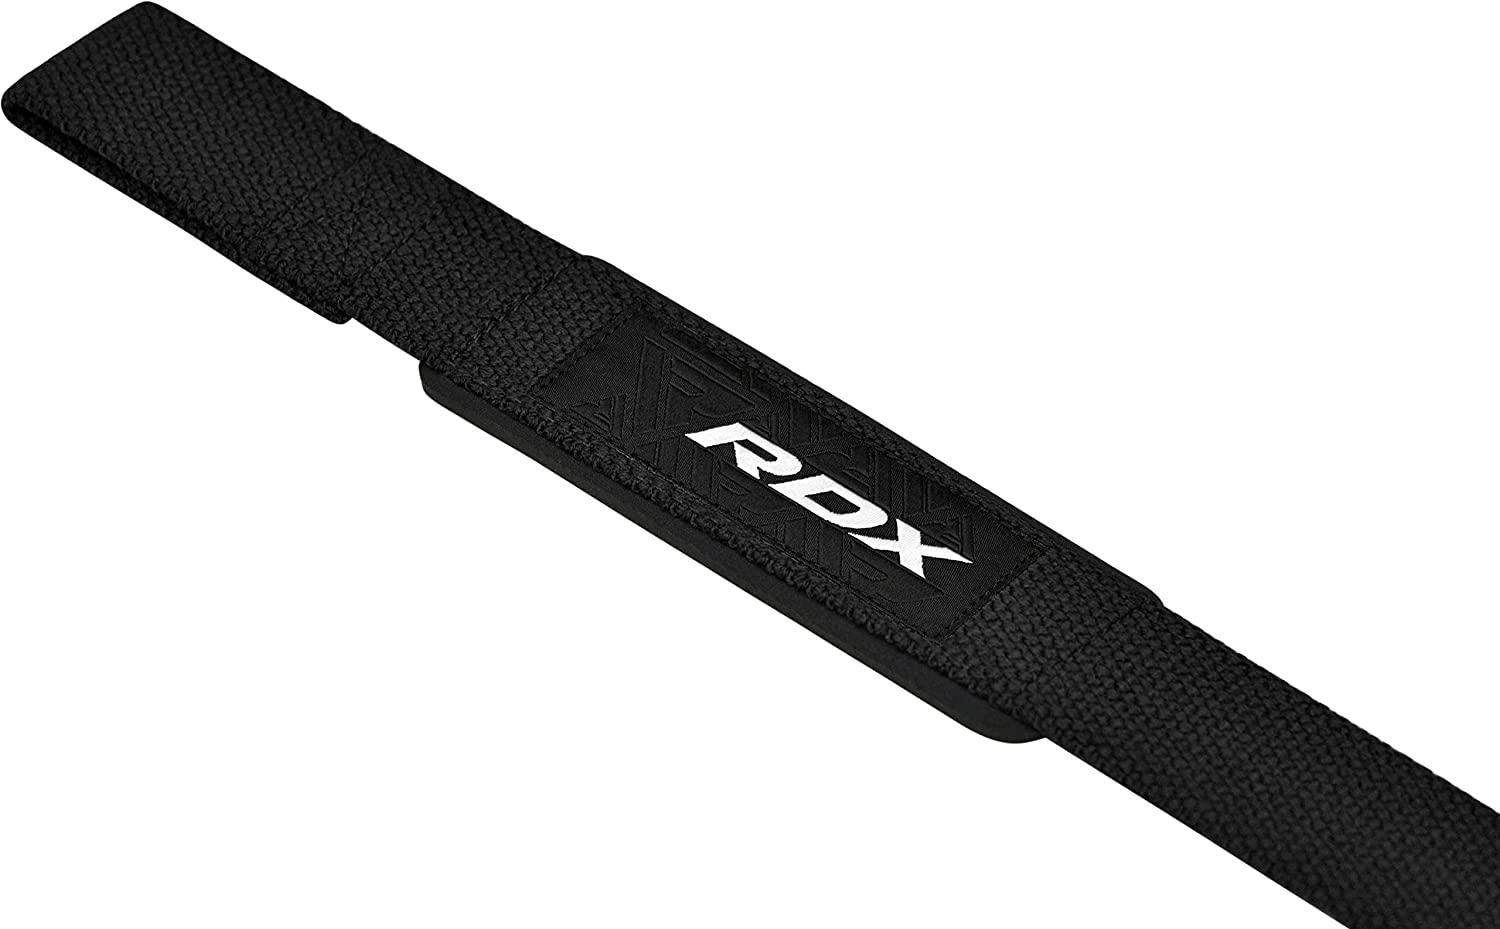 RDX Weight Lifting Wrist Wraps with Gym Straps, Elasticated 18” Cotton  Wrap, 60CM Anti Slip Workout Strap Support, Bodybuilding Deadlifting